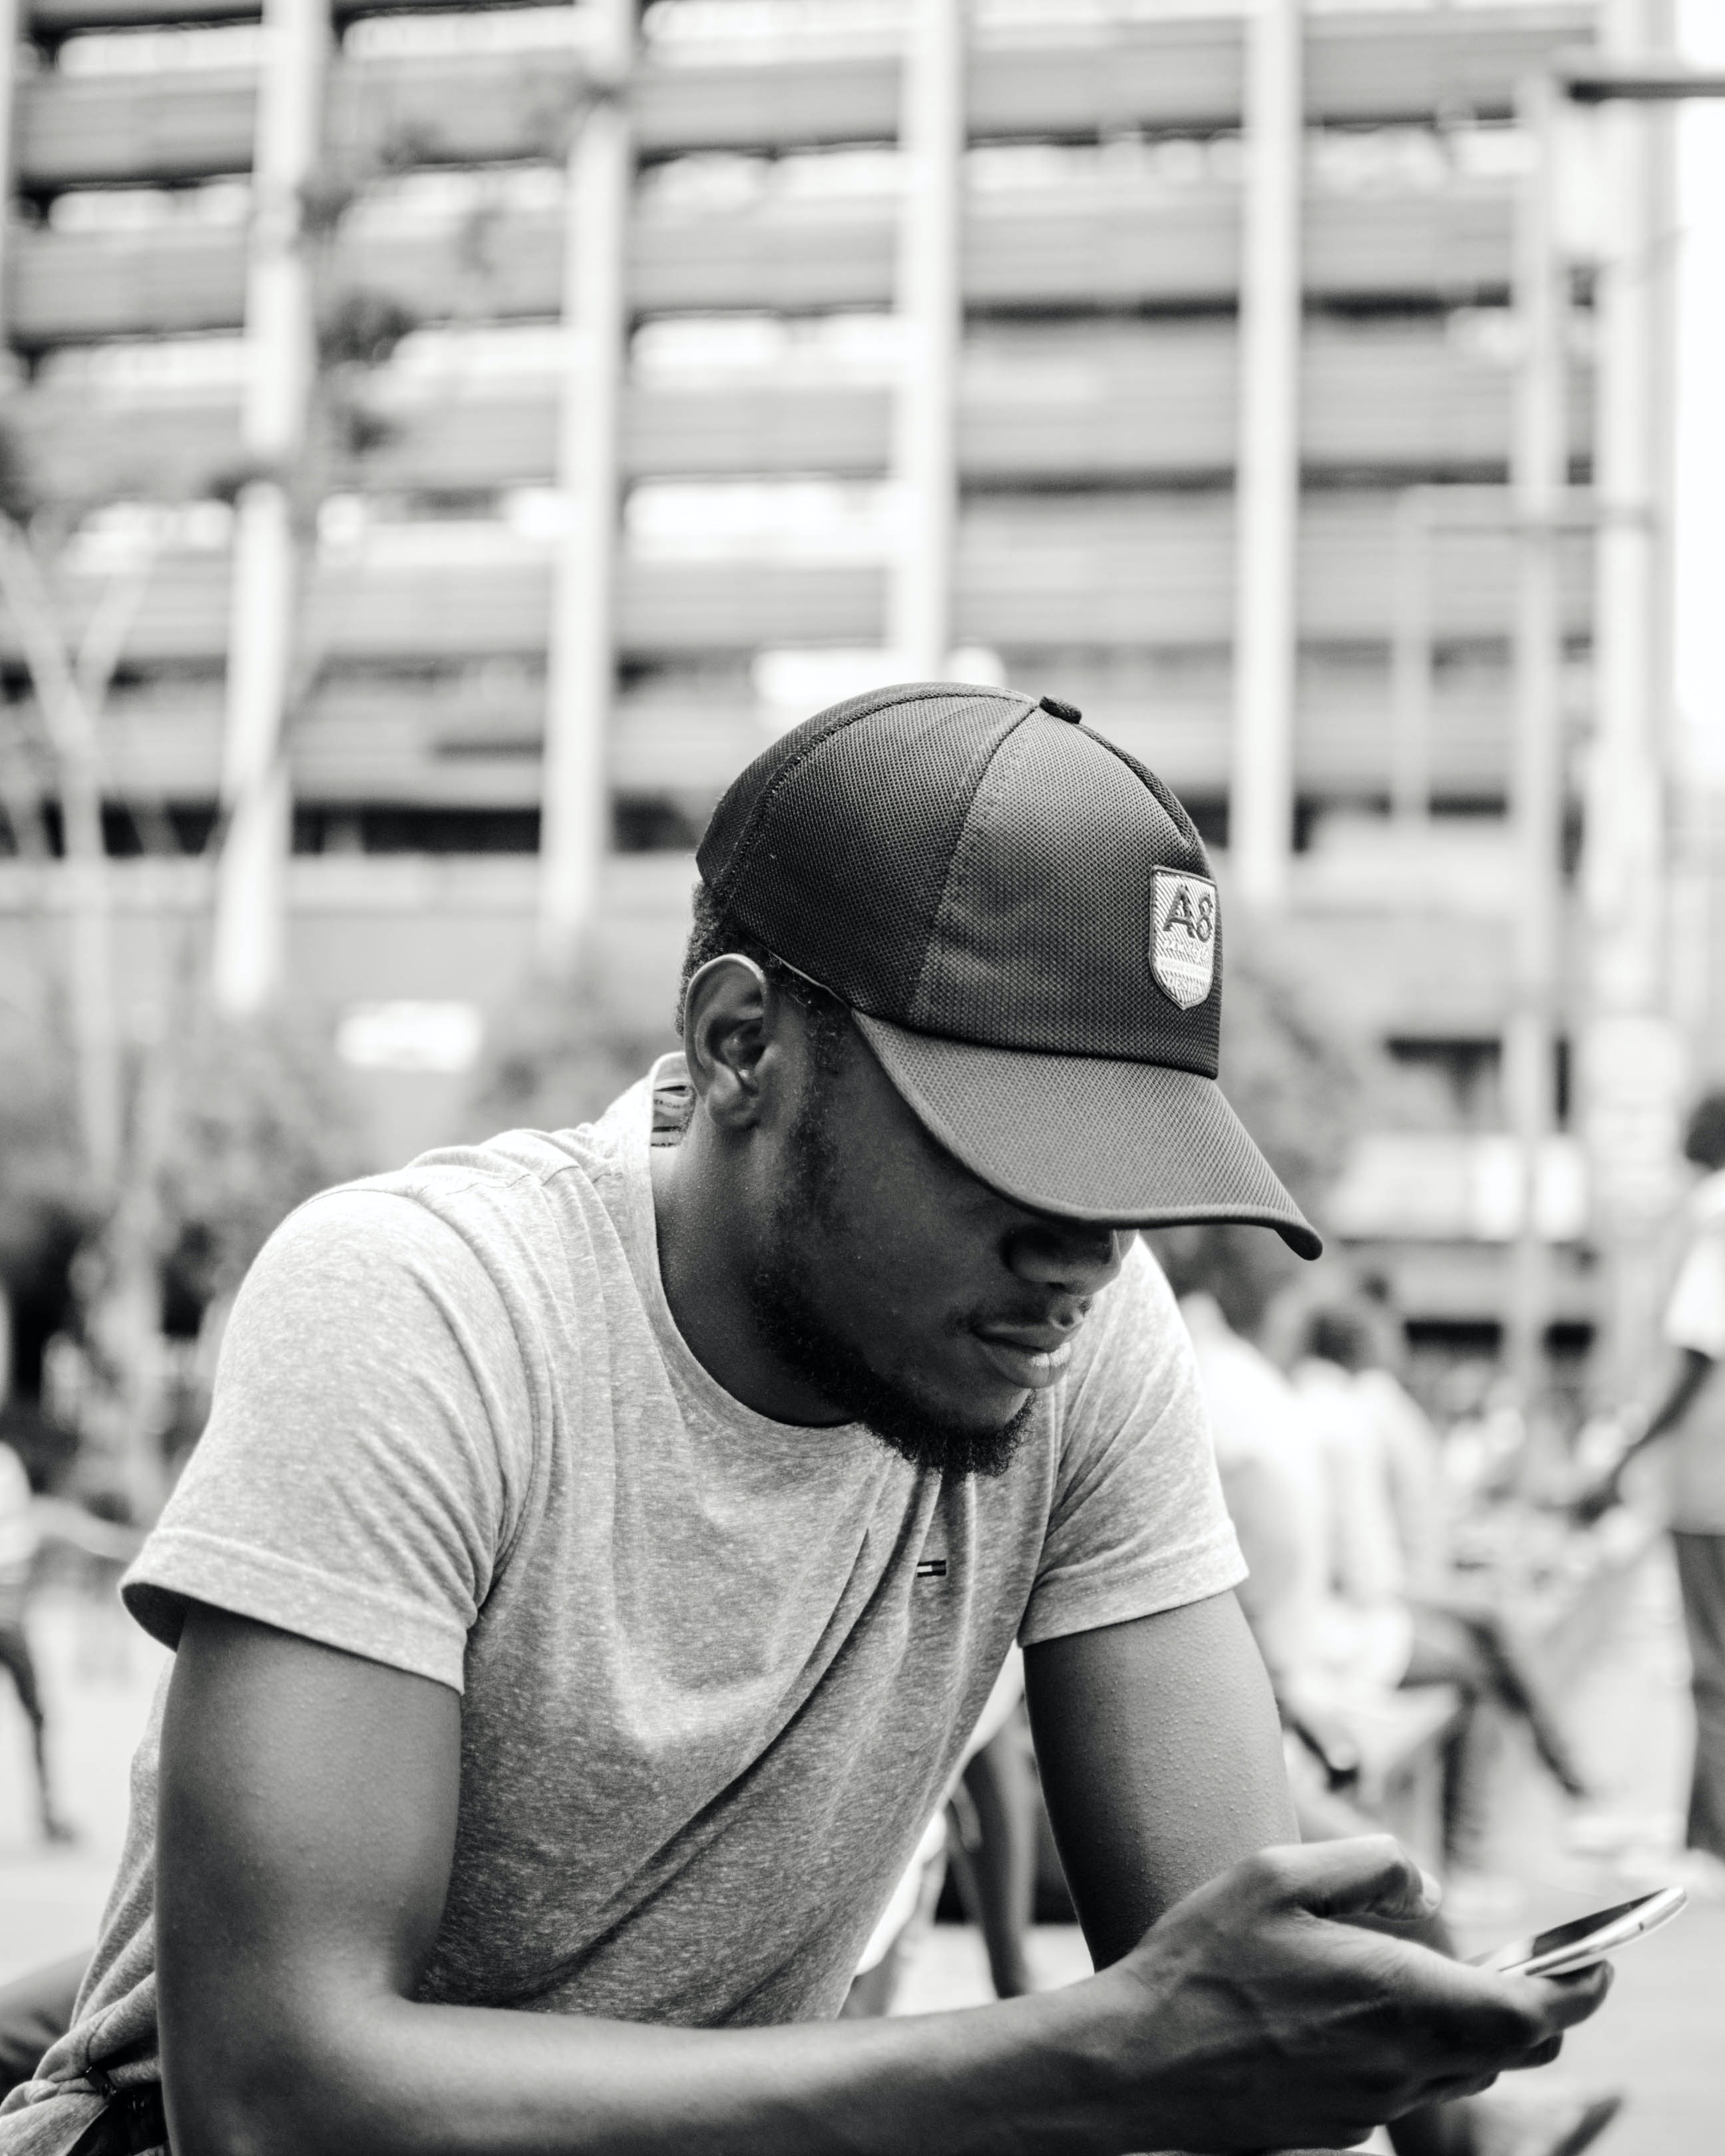 A young man using his phone. | Source: Pexels